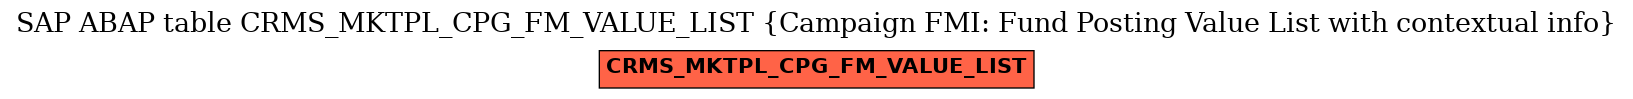 E-R Diagram for table CRMS_MKTPL_CPG_FM_VALUE_LIST (Campaign FMI: Fund Posting Value List with contextual info)